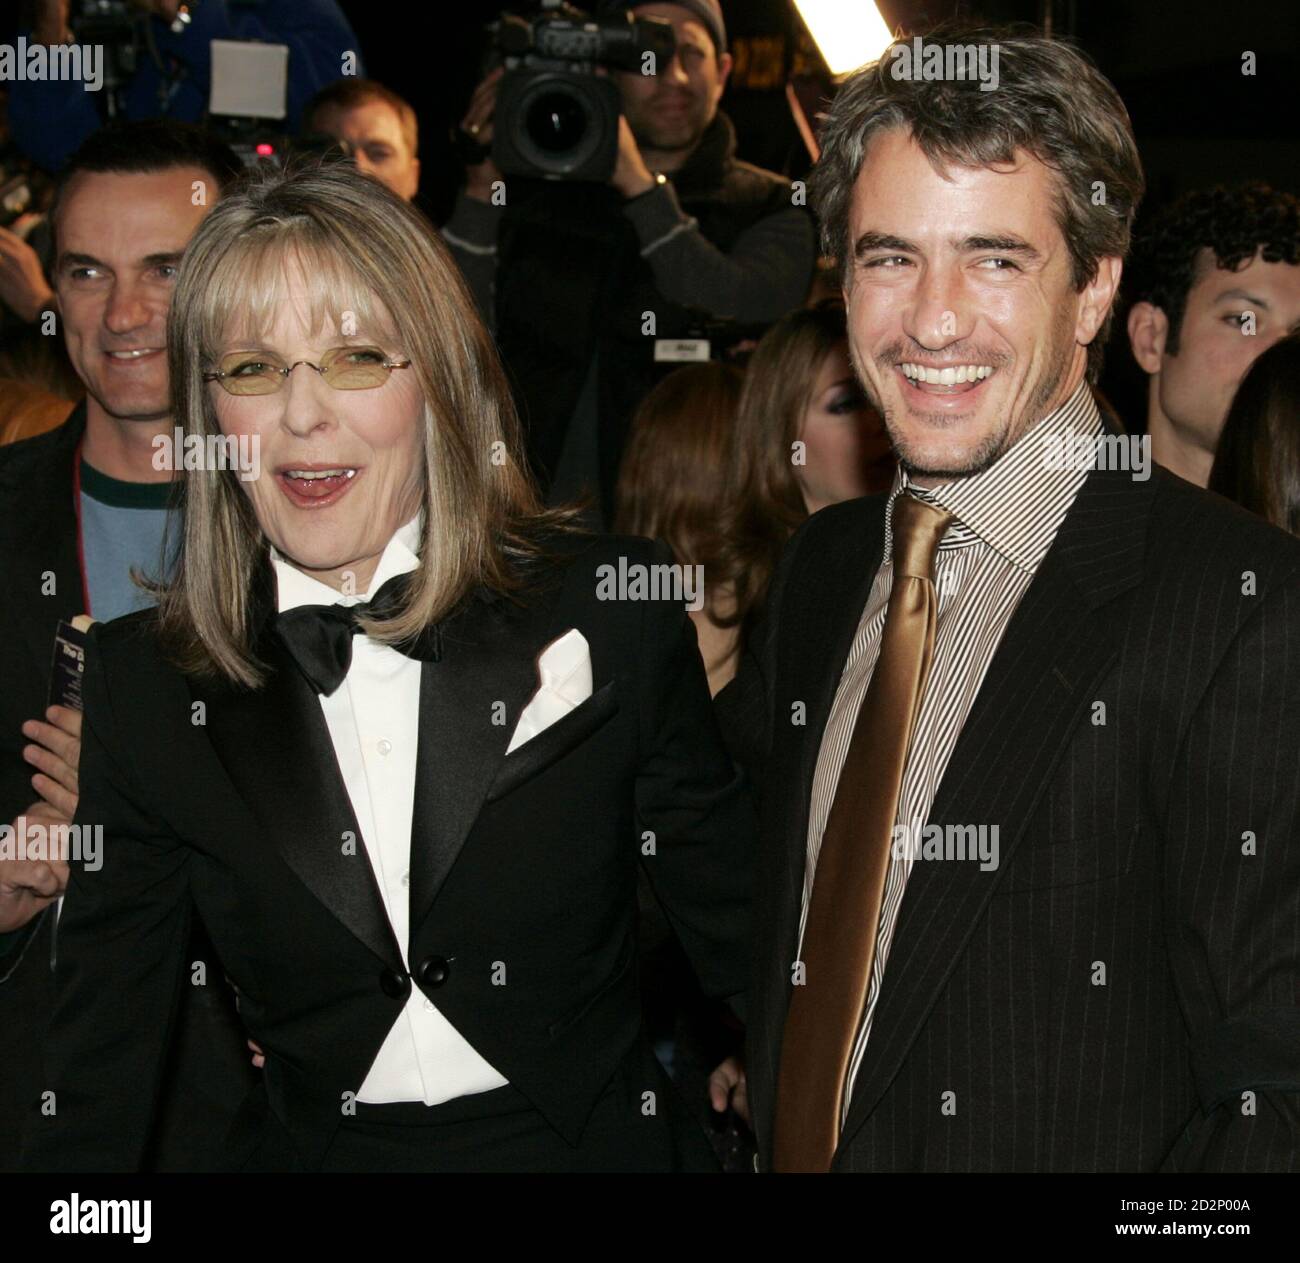 Actress Diane Keaton (L) and actor Dermot Mulroney smile as they arrive at the premiere of their new film 'The Family Stone' in Los Angeles December 6, 2005. [The film, a comic story about the annual holiday gathering of a New England family, also stars Rachel McAdams, Claire Danes, Sarah Jessica Parker and Craig T. Nelson and opens in the U.S. on December 16.] Stock Photo